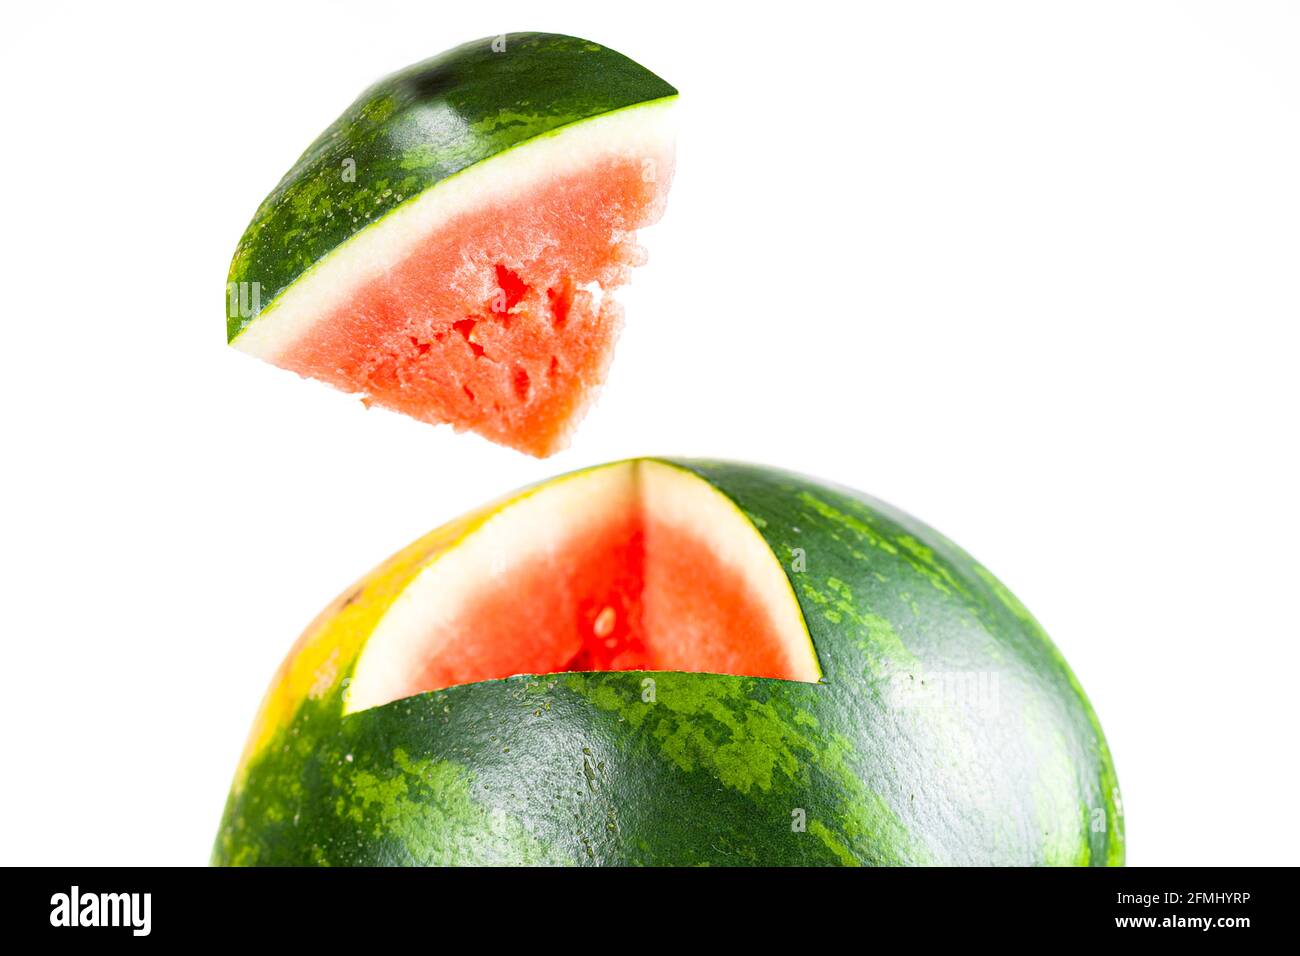 A green ripe watermelon is cut with a knife and a pyramidal wedge was carved out. Closeup image shows the wedge in air with the fitting part of the sp Stock Photo